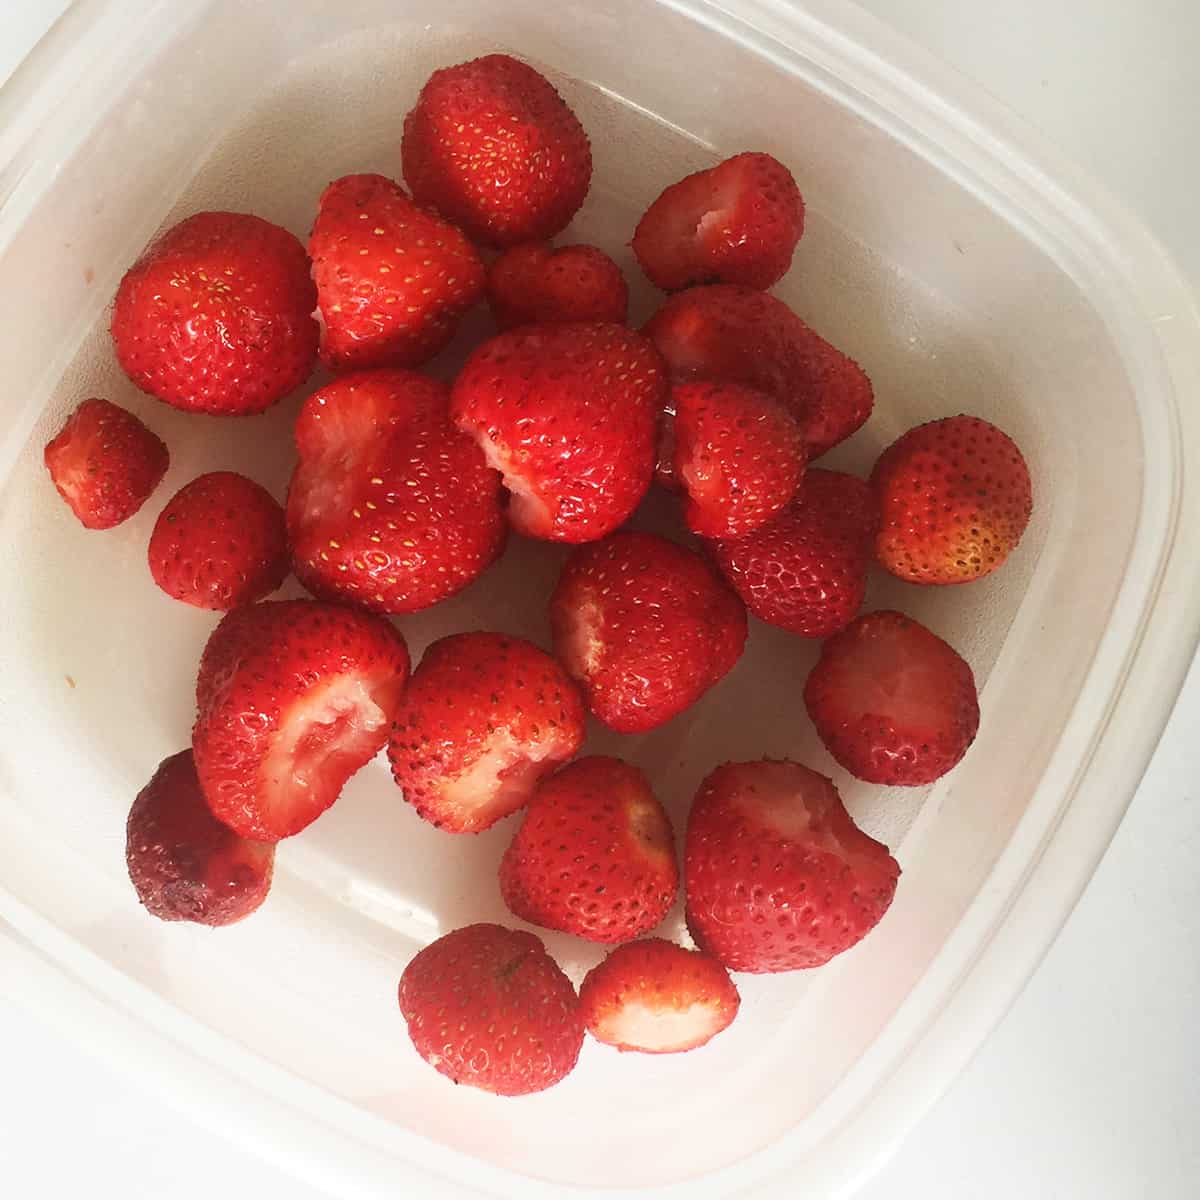 A container of fresh strawberries.